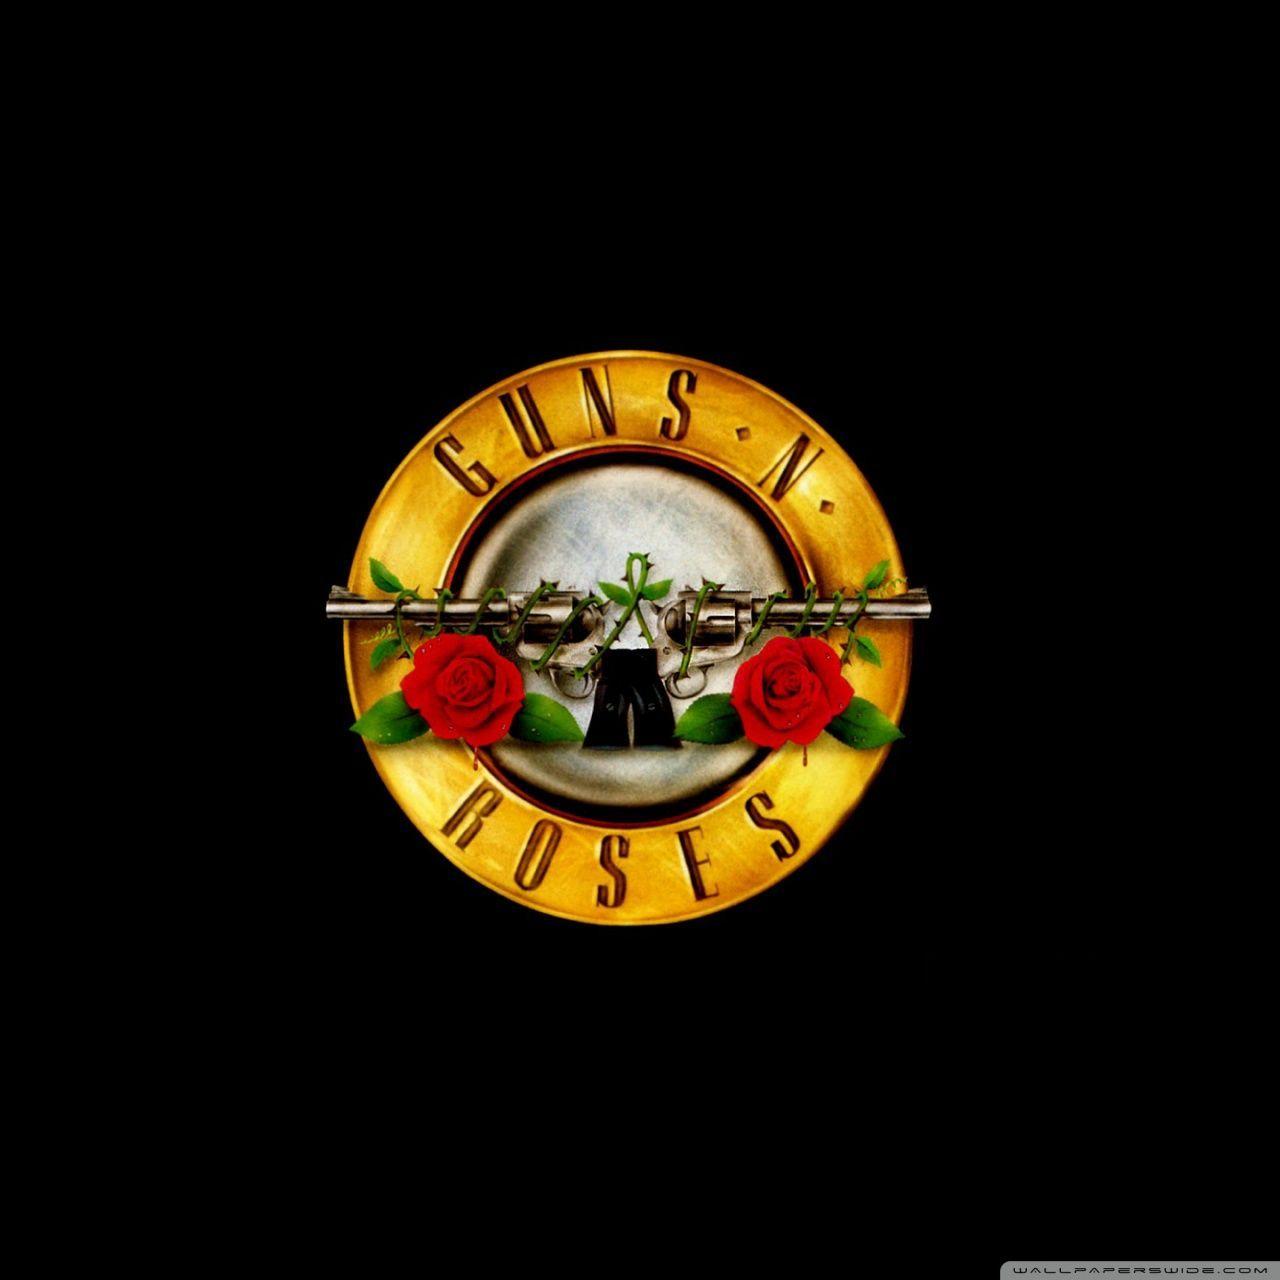 Download free guns n roses wallpaper for your mobile phone